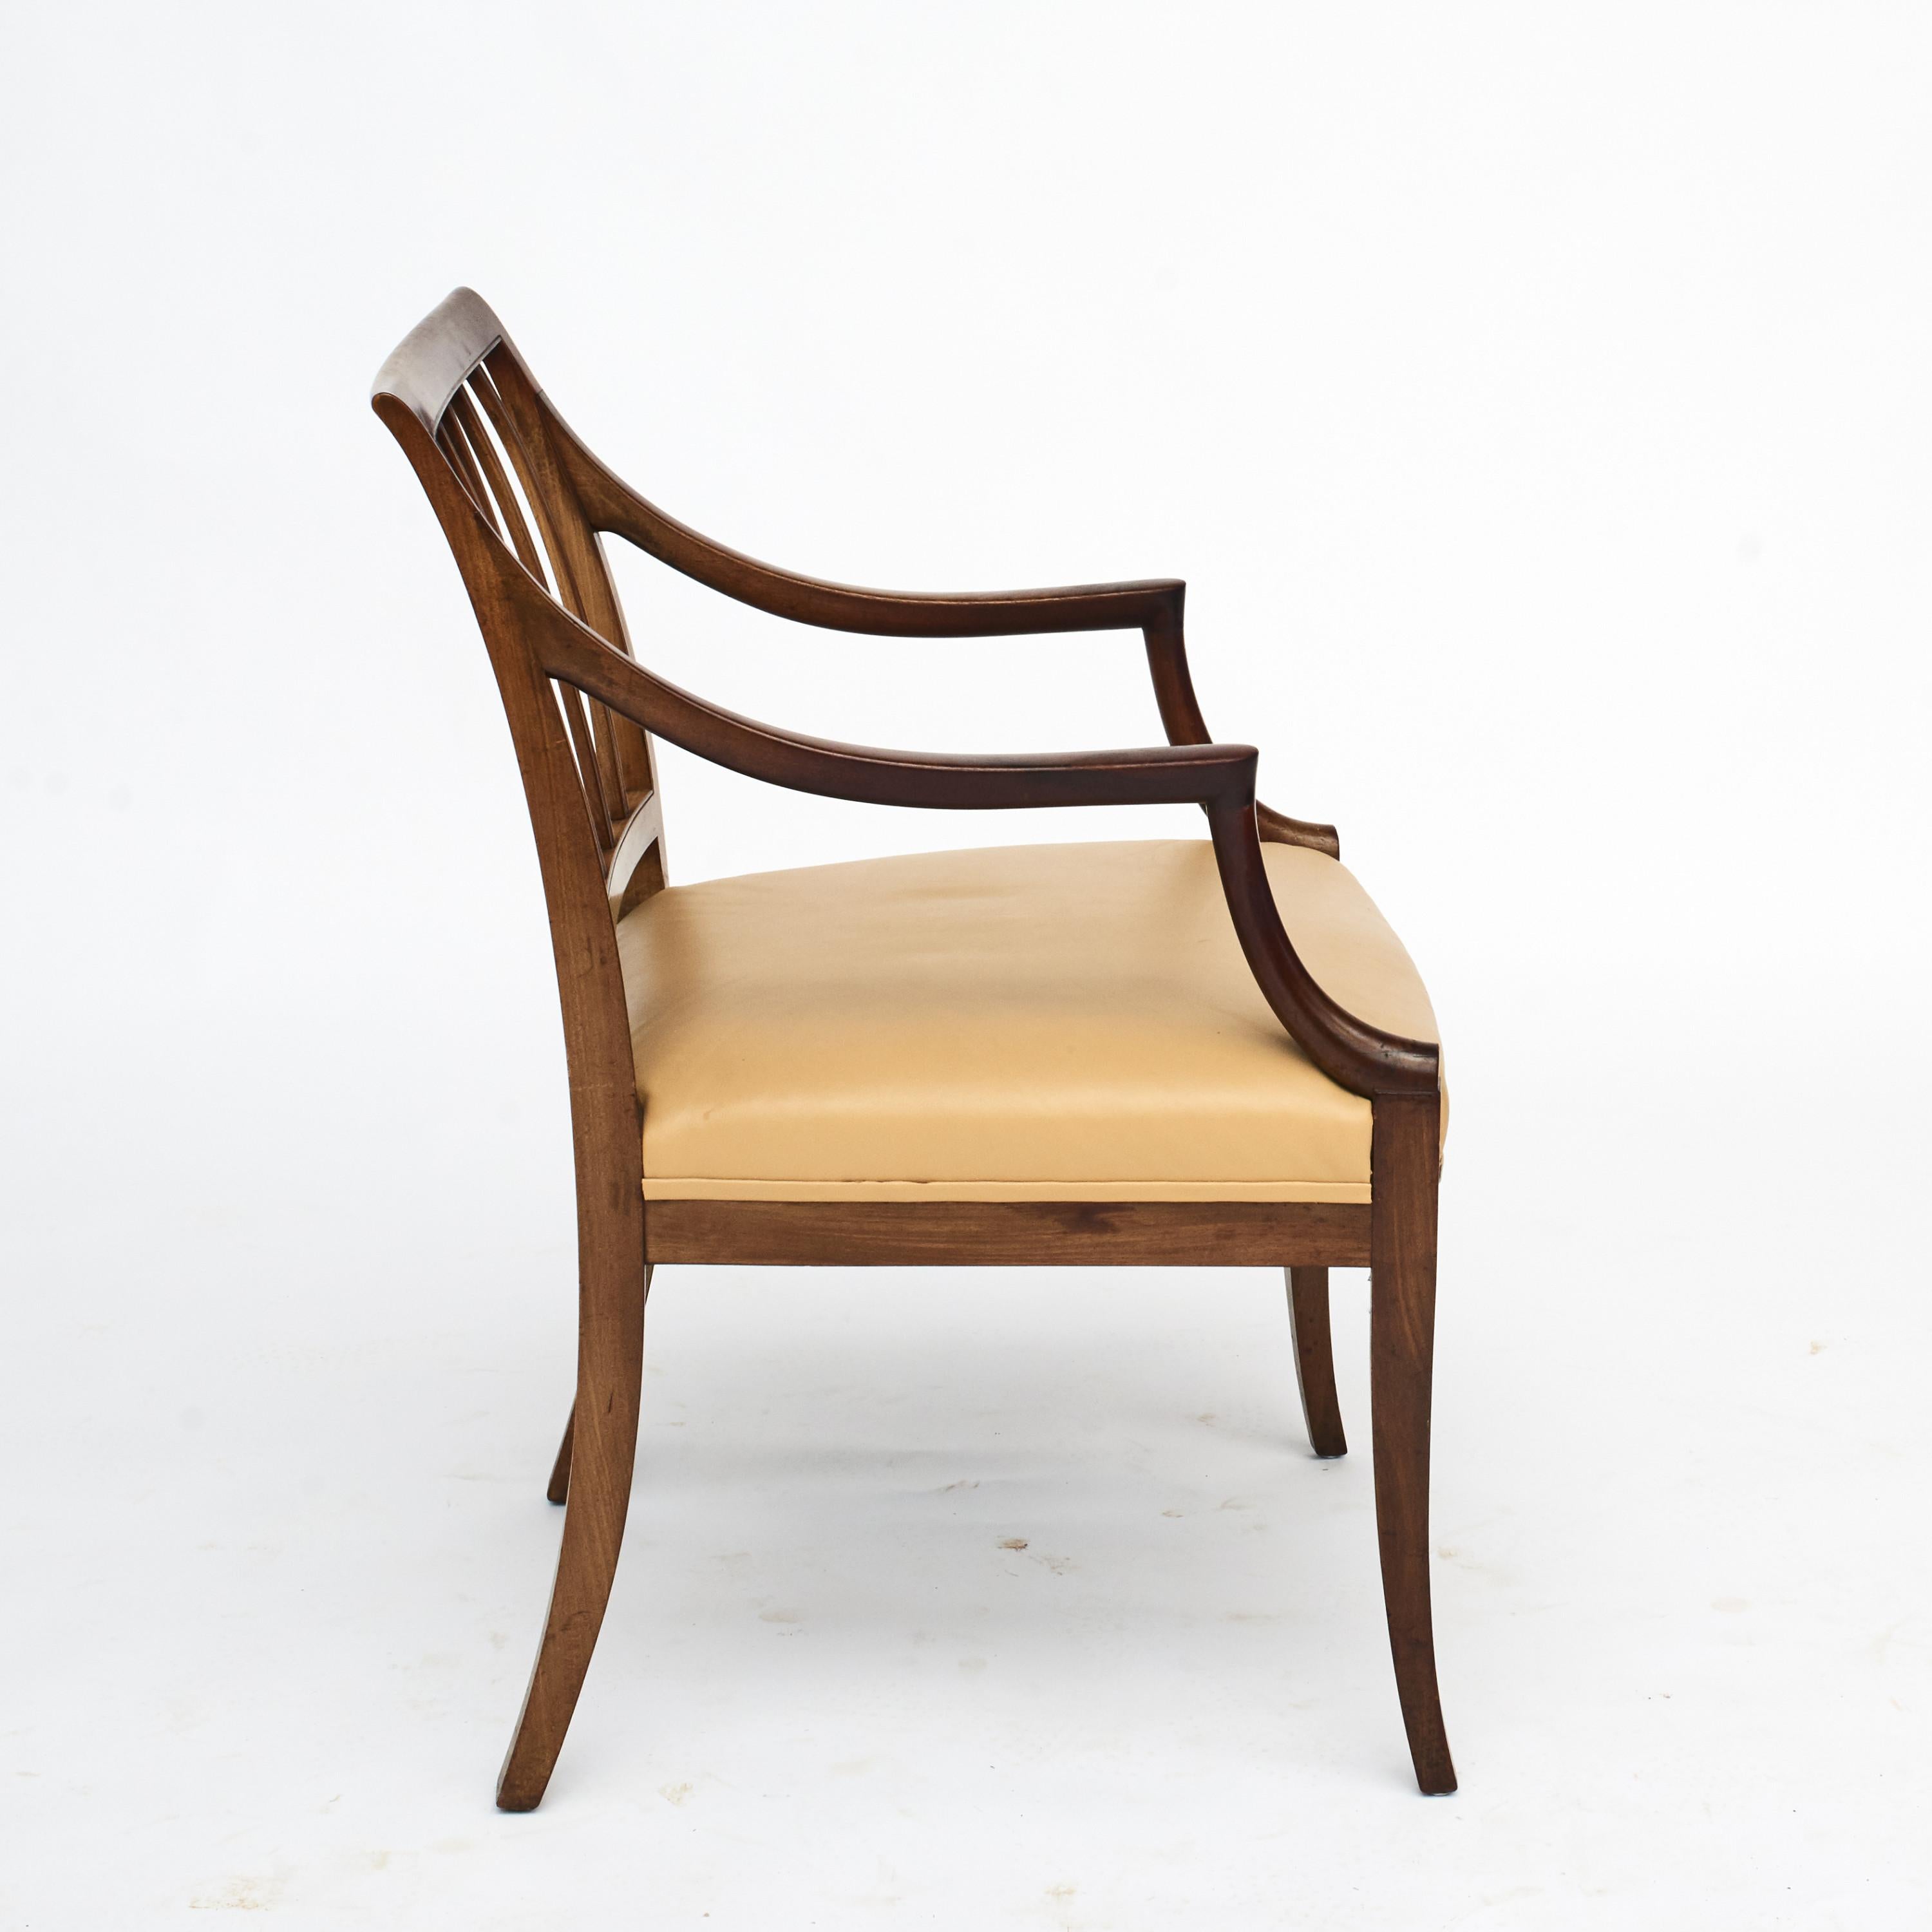 Frits Henningsen 1889-1965.
Desk arm chair in solid mahogany, seat with light brown leather. Designed in 1930-1950.
Frits Henningsen was both a designer and a cabinet-maker. He cared deeply about quality, and was uncompromising in his